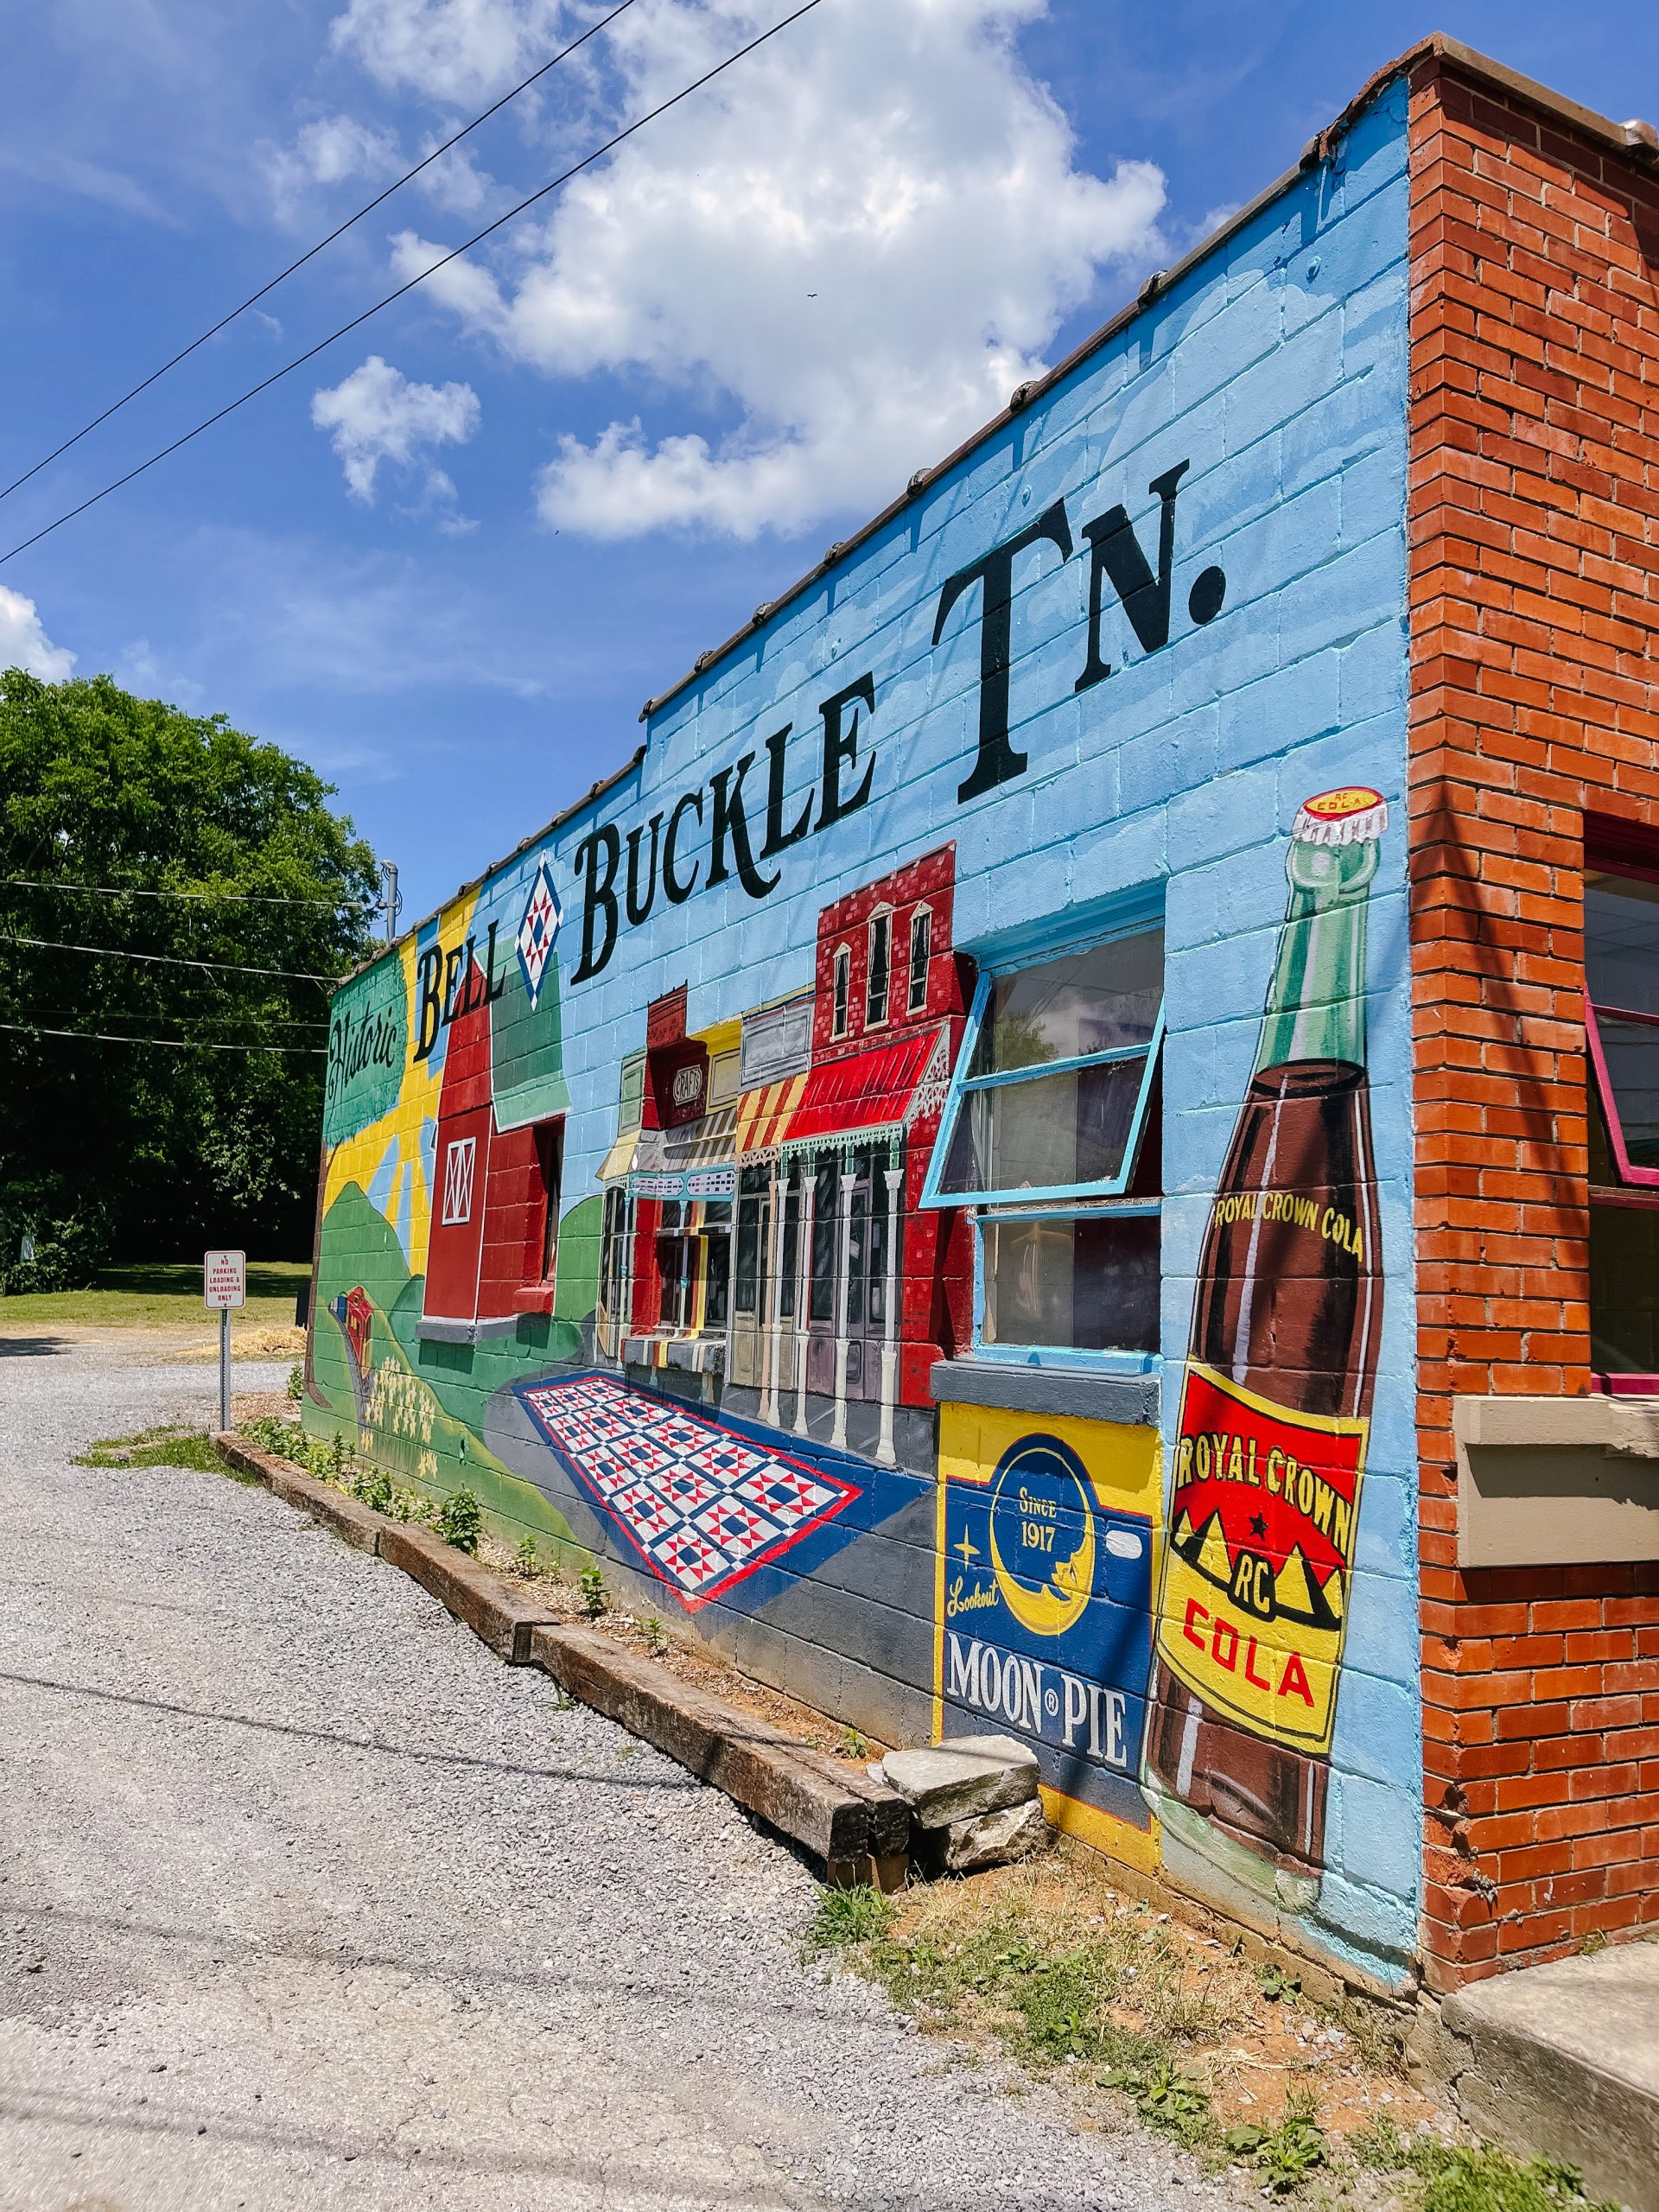 Bell Buckle Tennessee travel guide visit angela lanter